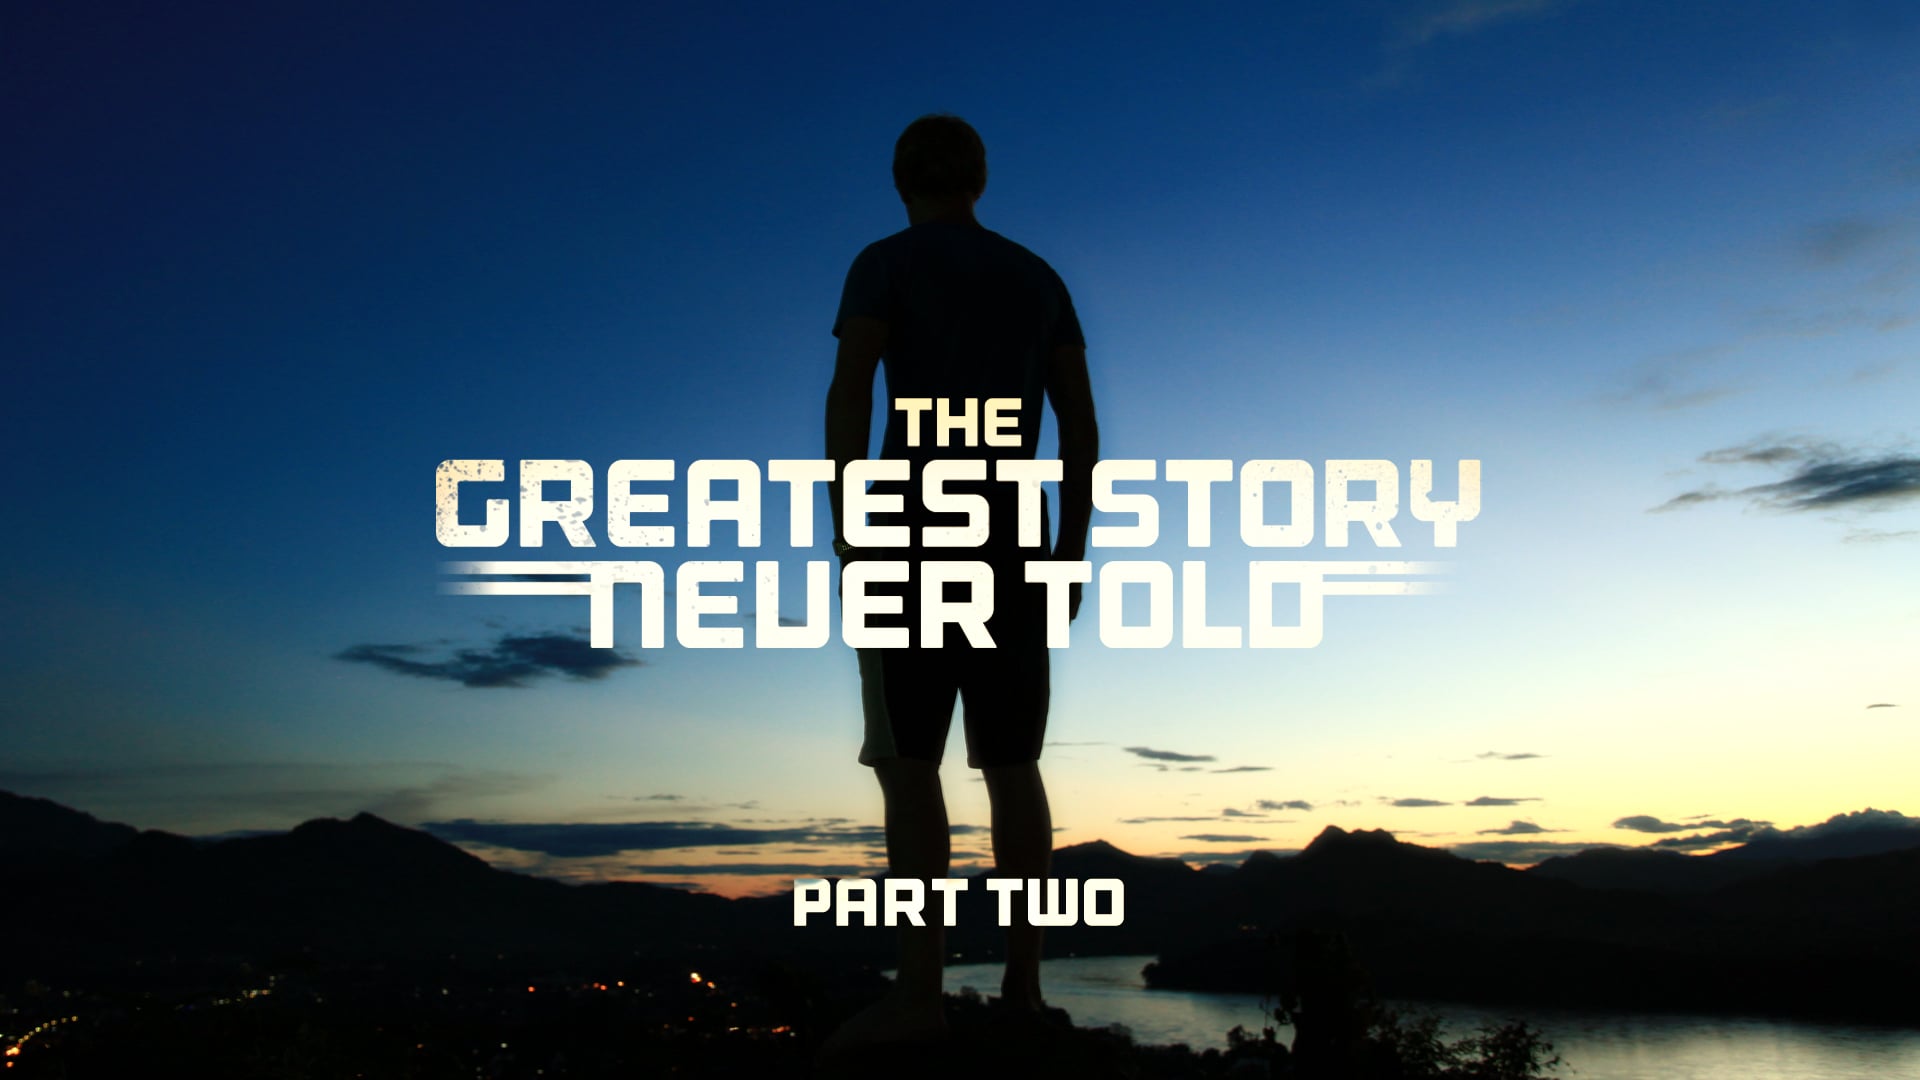 The great story never told